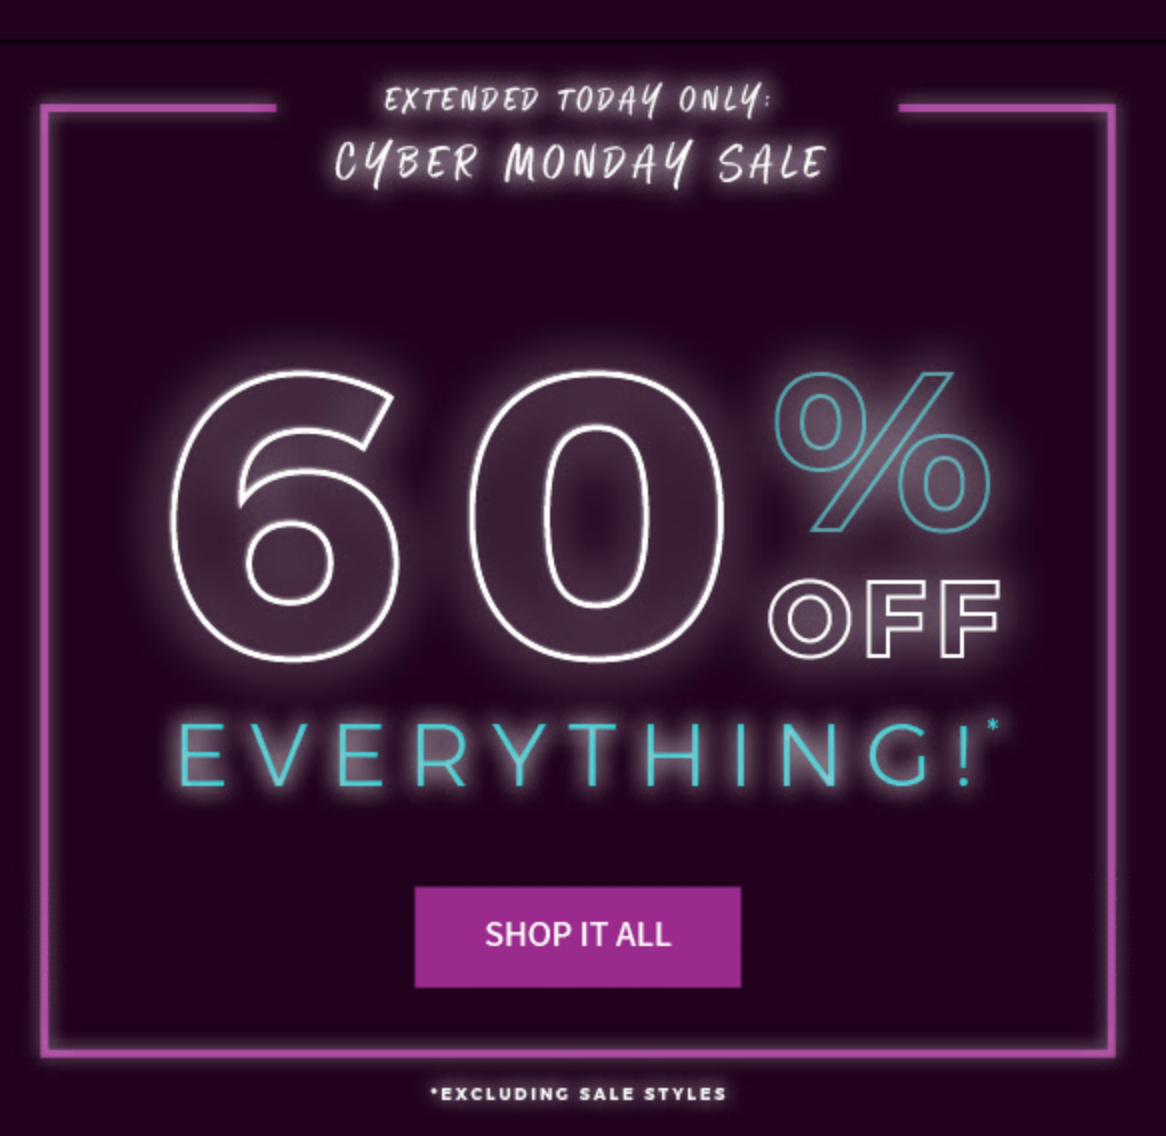 Extended! Fabletics Cyber Monday Deal – 60% Off Sitewide!